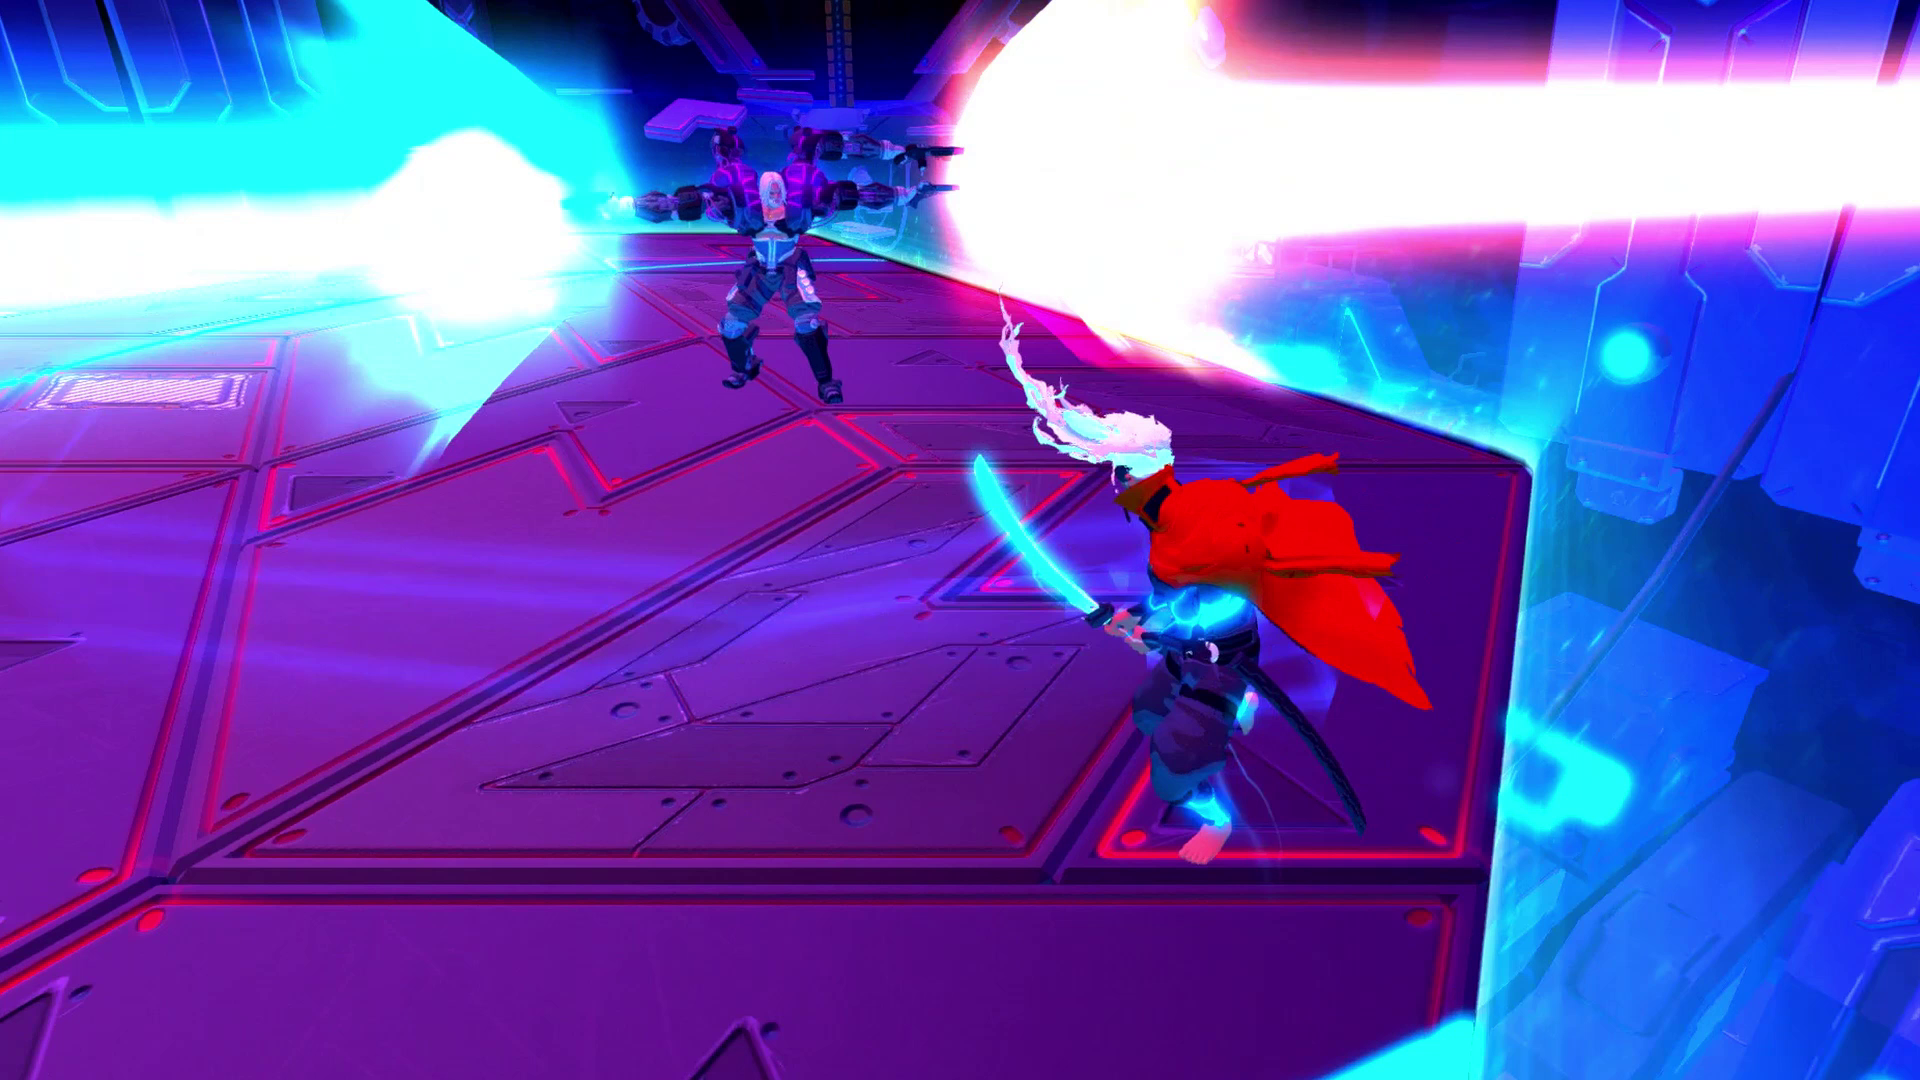 Furi is Now Available on the Xbox One